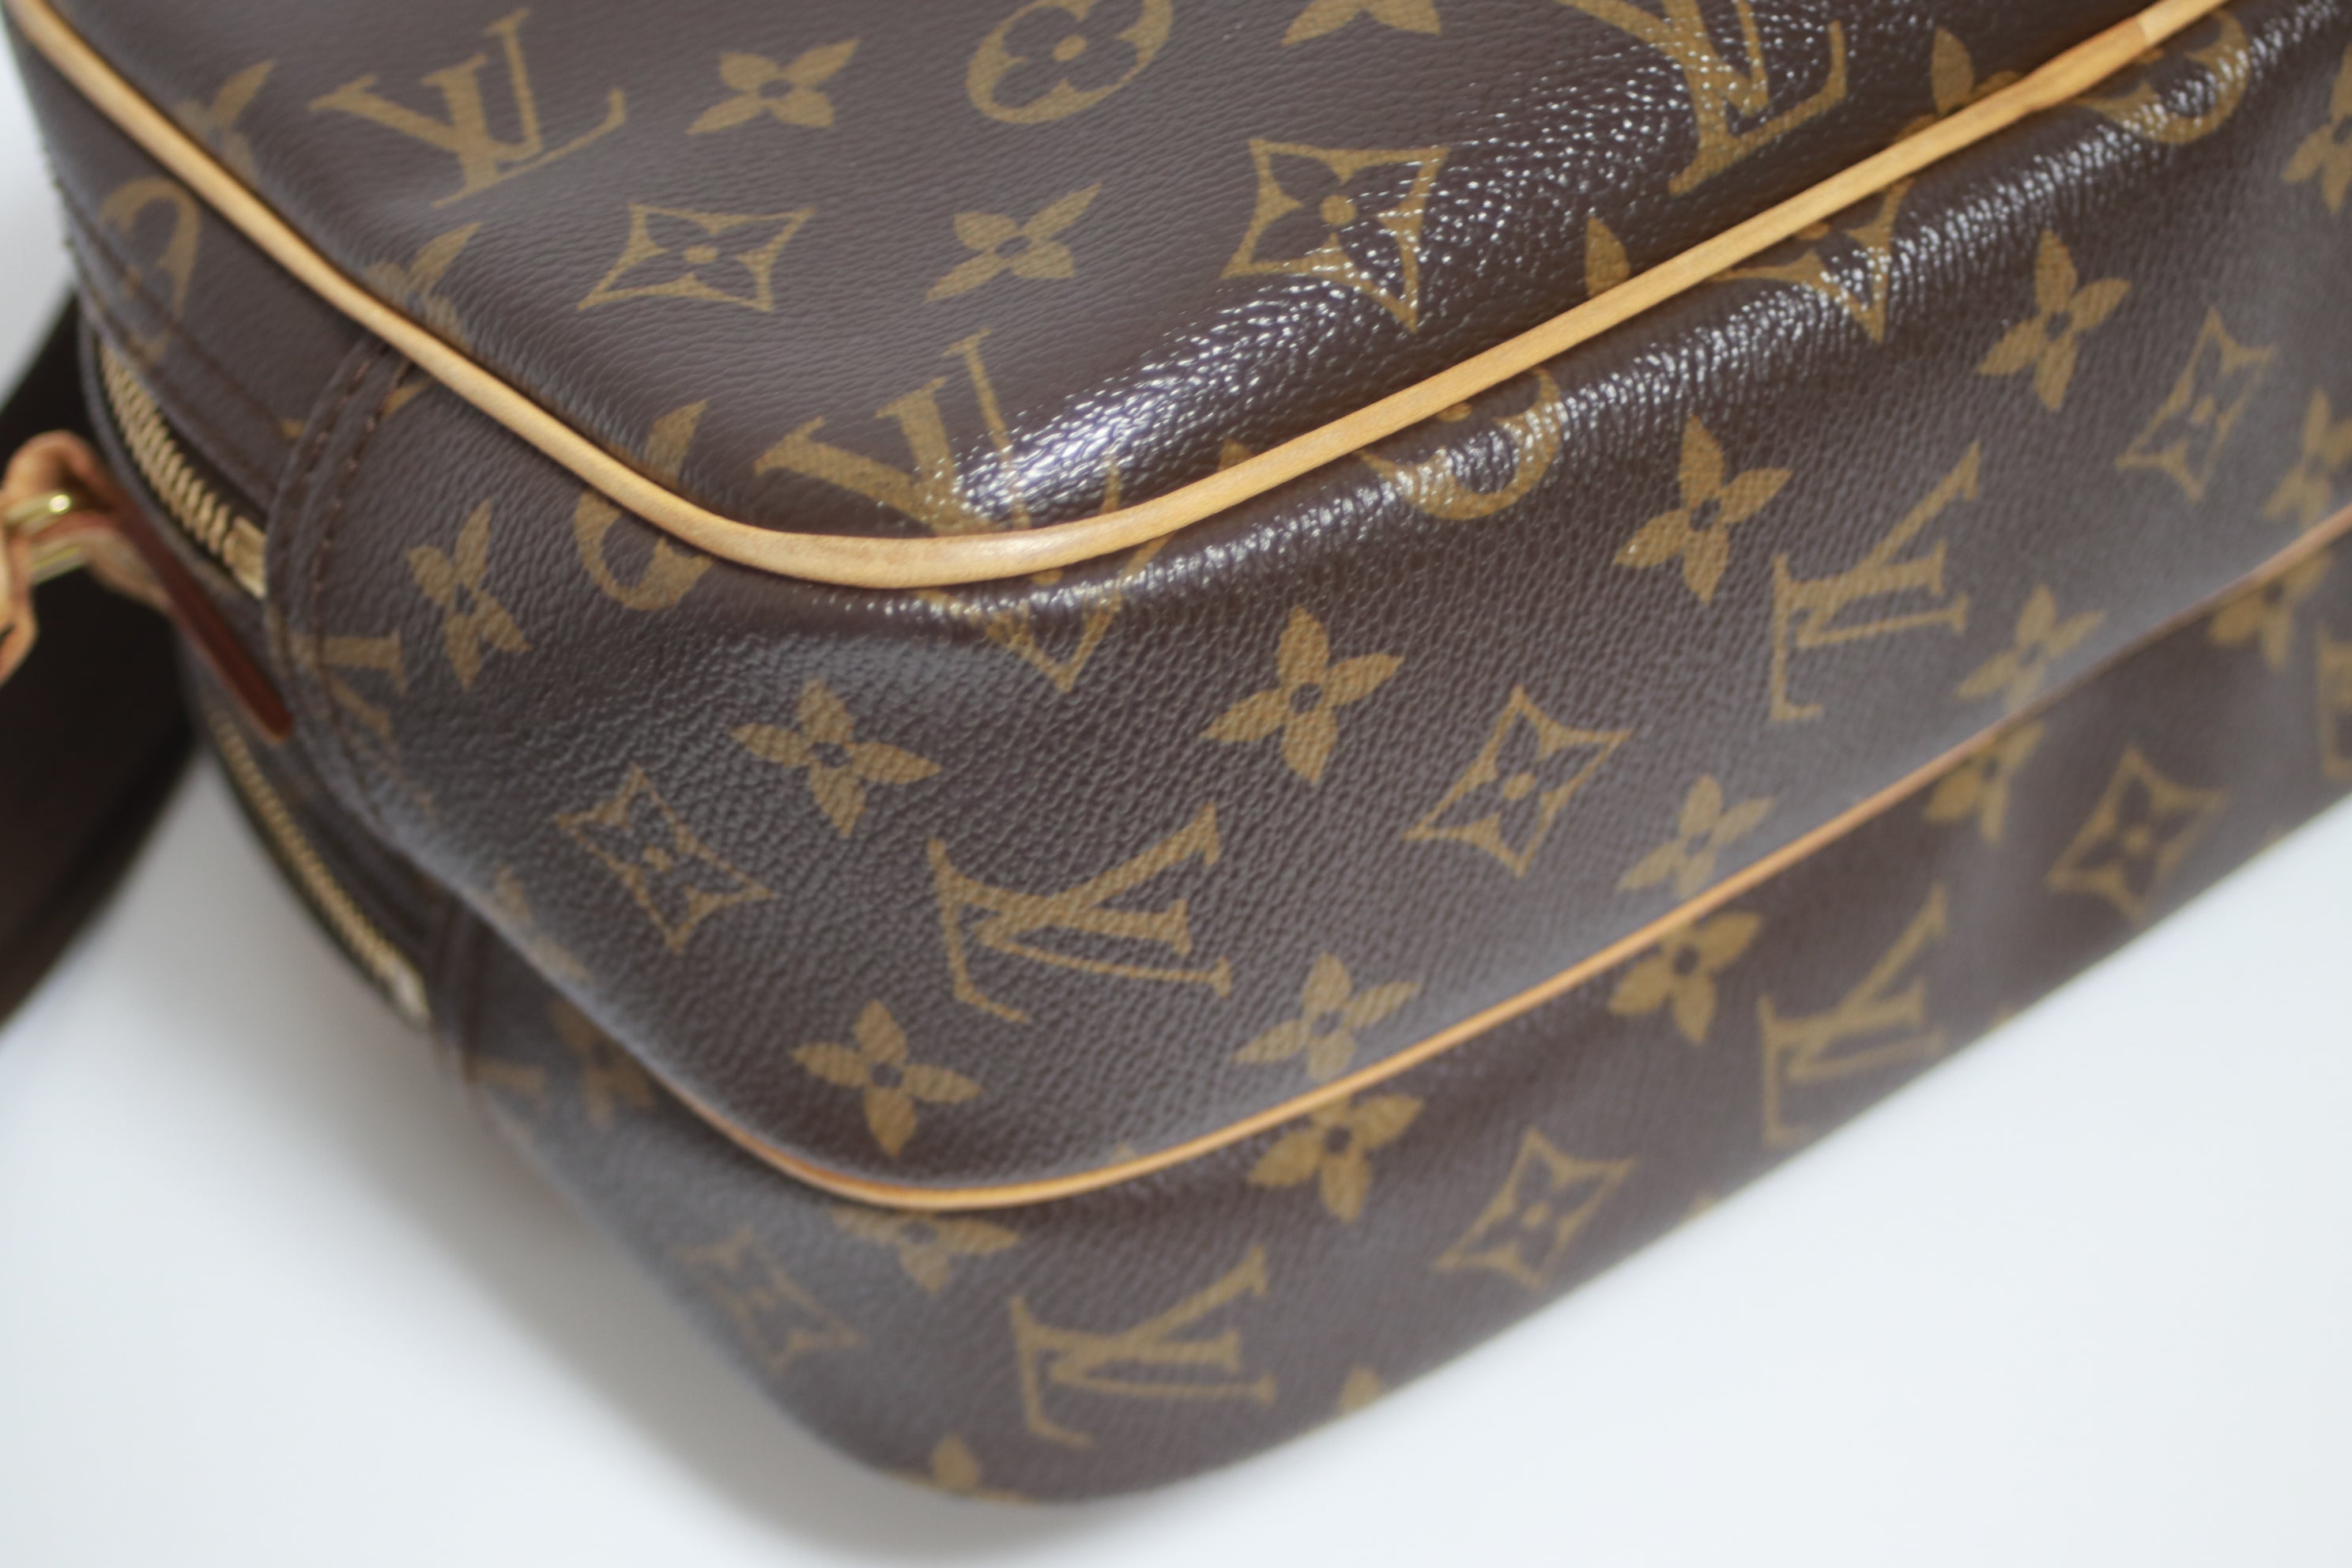 Louis Vuitton Reporter PM Messenger Bag Used (7985)